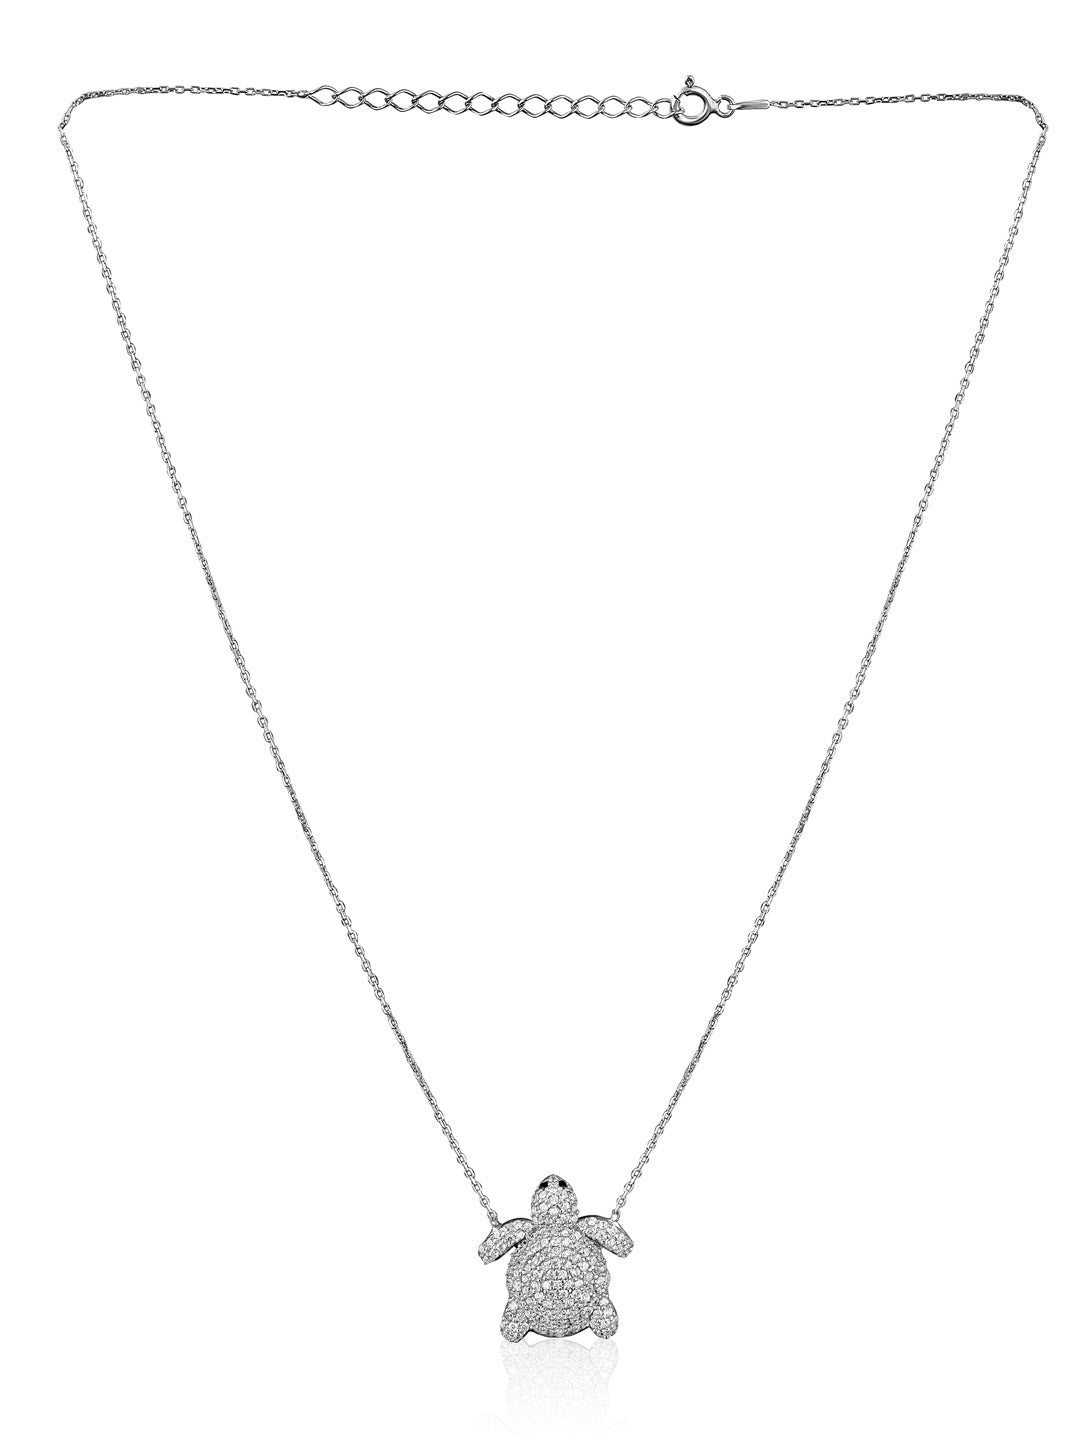 Pure Silver Turtle Necklace Embellished With Cubic Zirconia Stones 